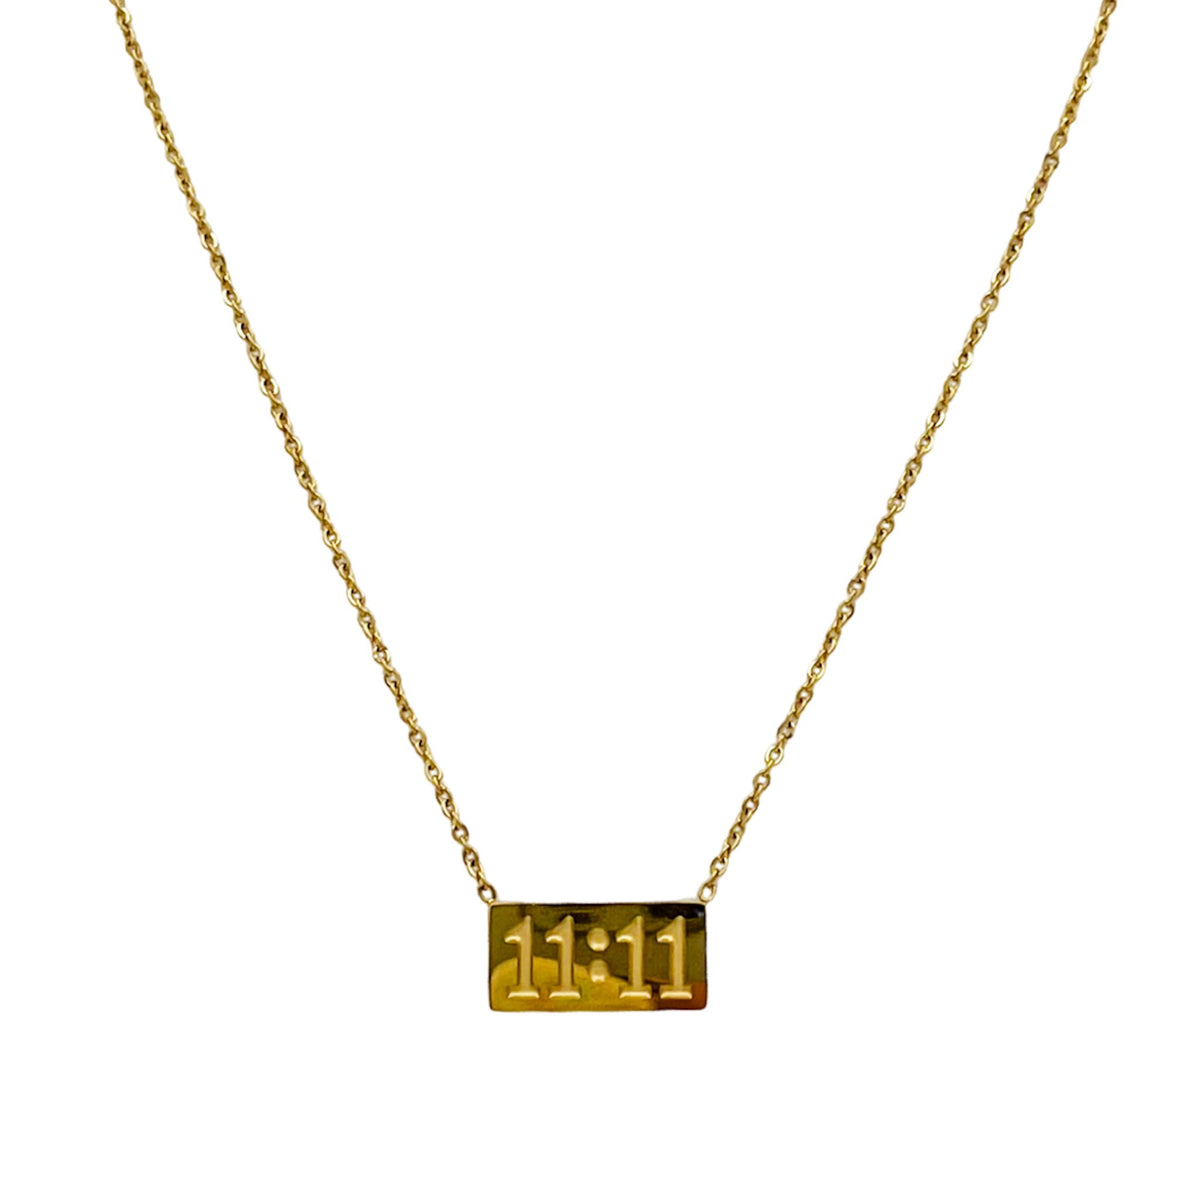 1111 pendant necklace 18k gold plated stainless steel